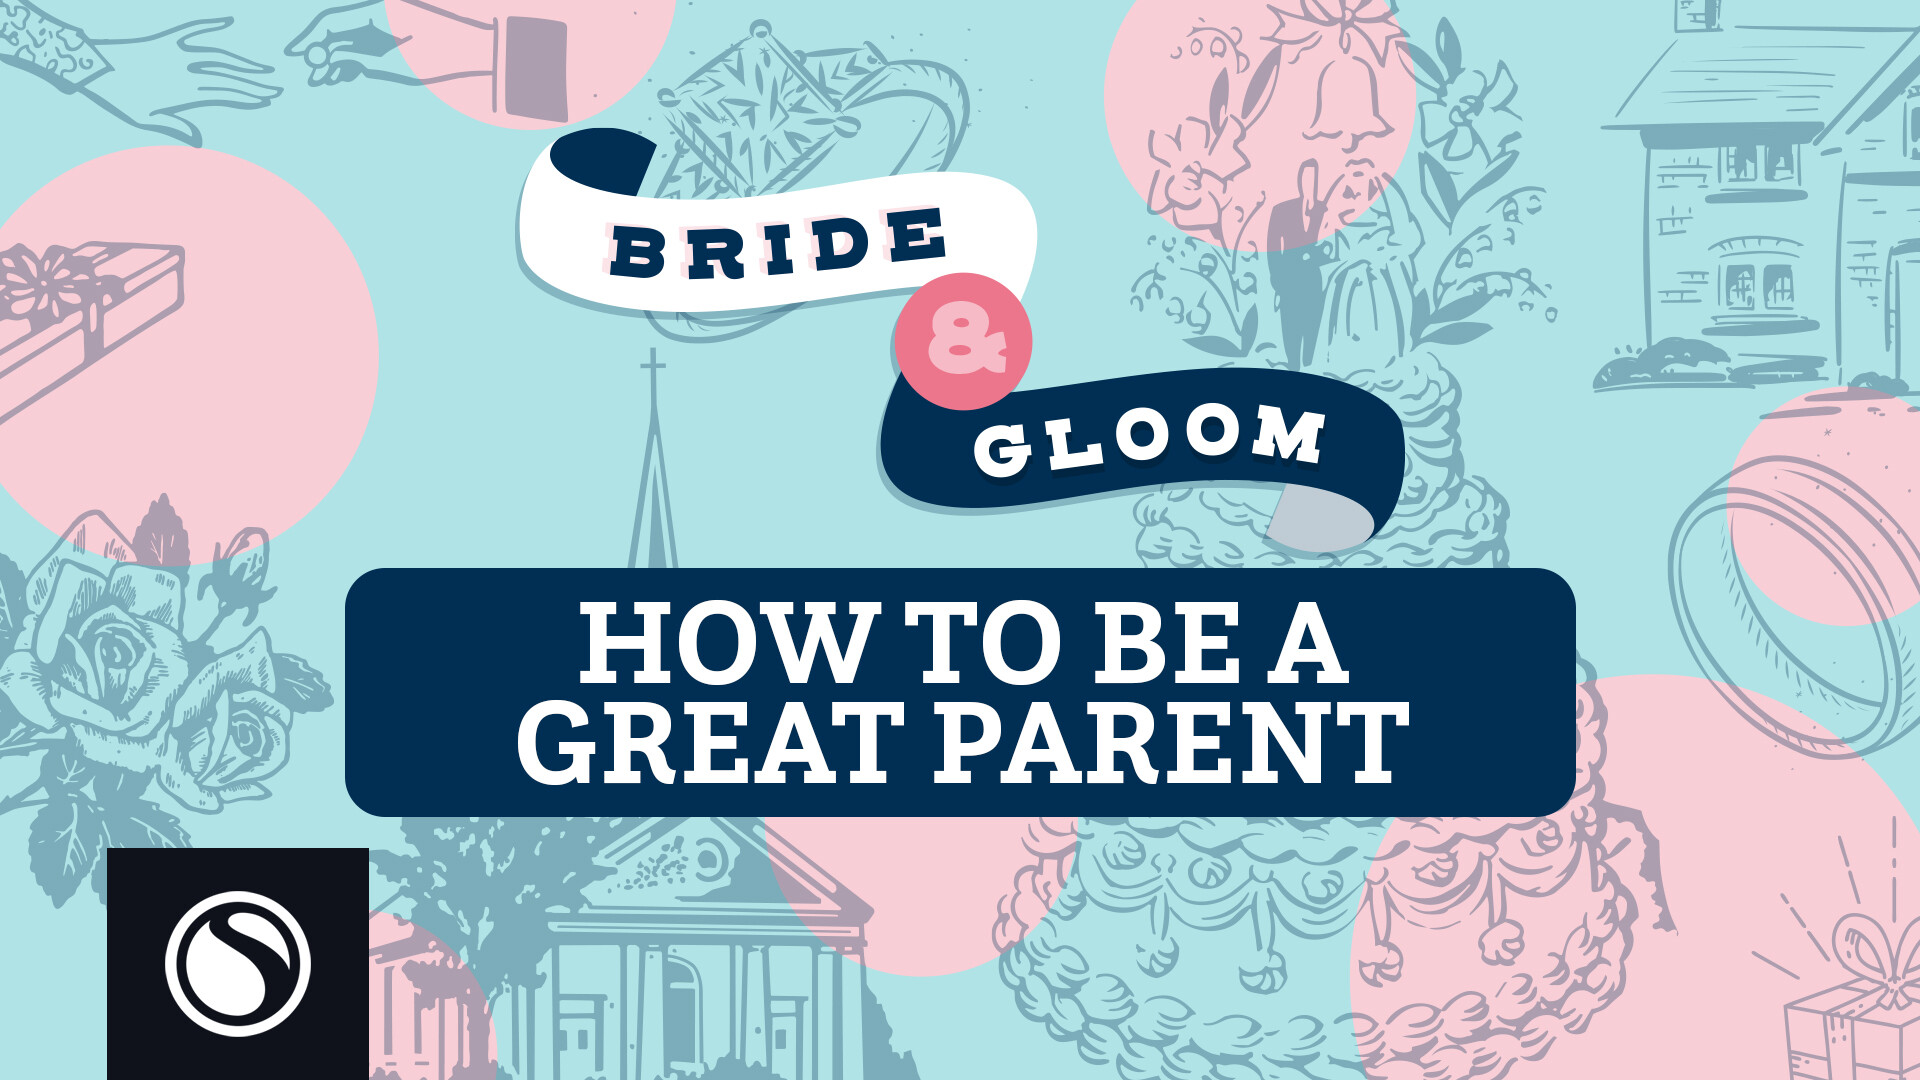 Watch Bride & Gloom - How To Be A Great Parent